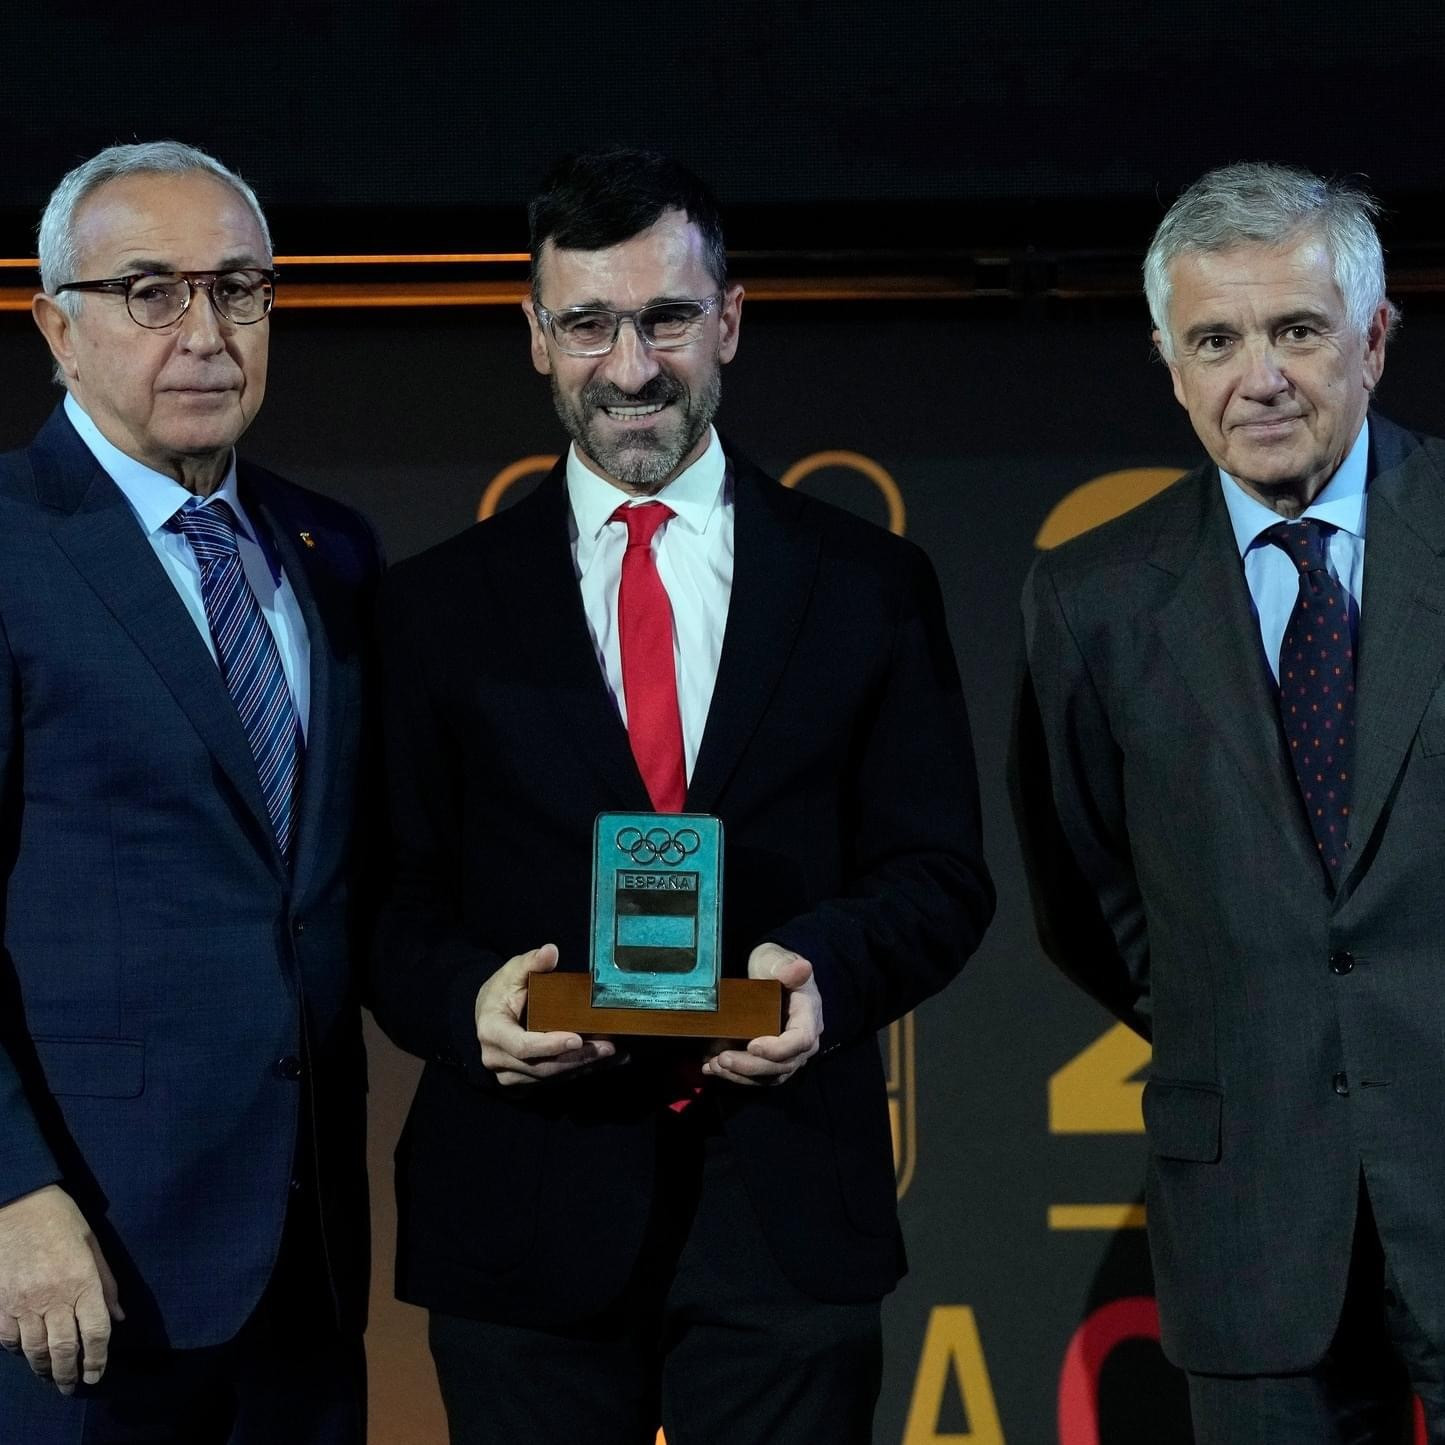 President of the Spanish Olympic Committee Alejandro Blanco and Vice President of the International Olympic Committee, Juan Antonio Samaranch Jr, pose for photographers with athlete Jesús Ángel 'Chuso' García Bragado, who received an award for his career © COE